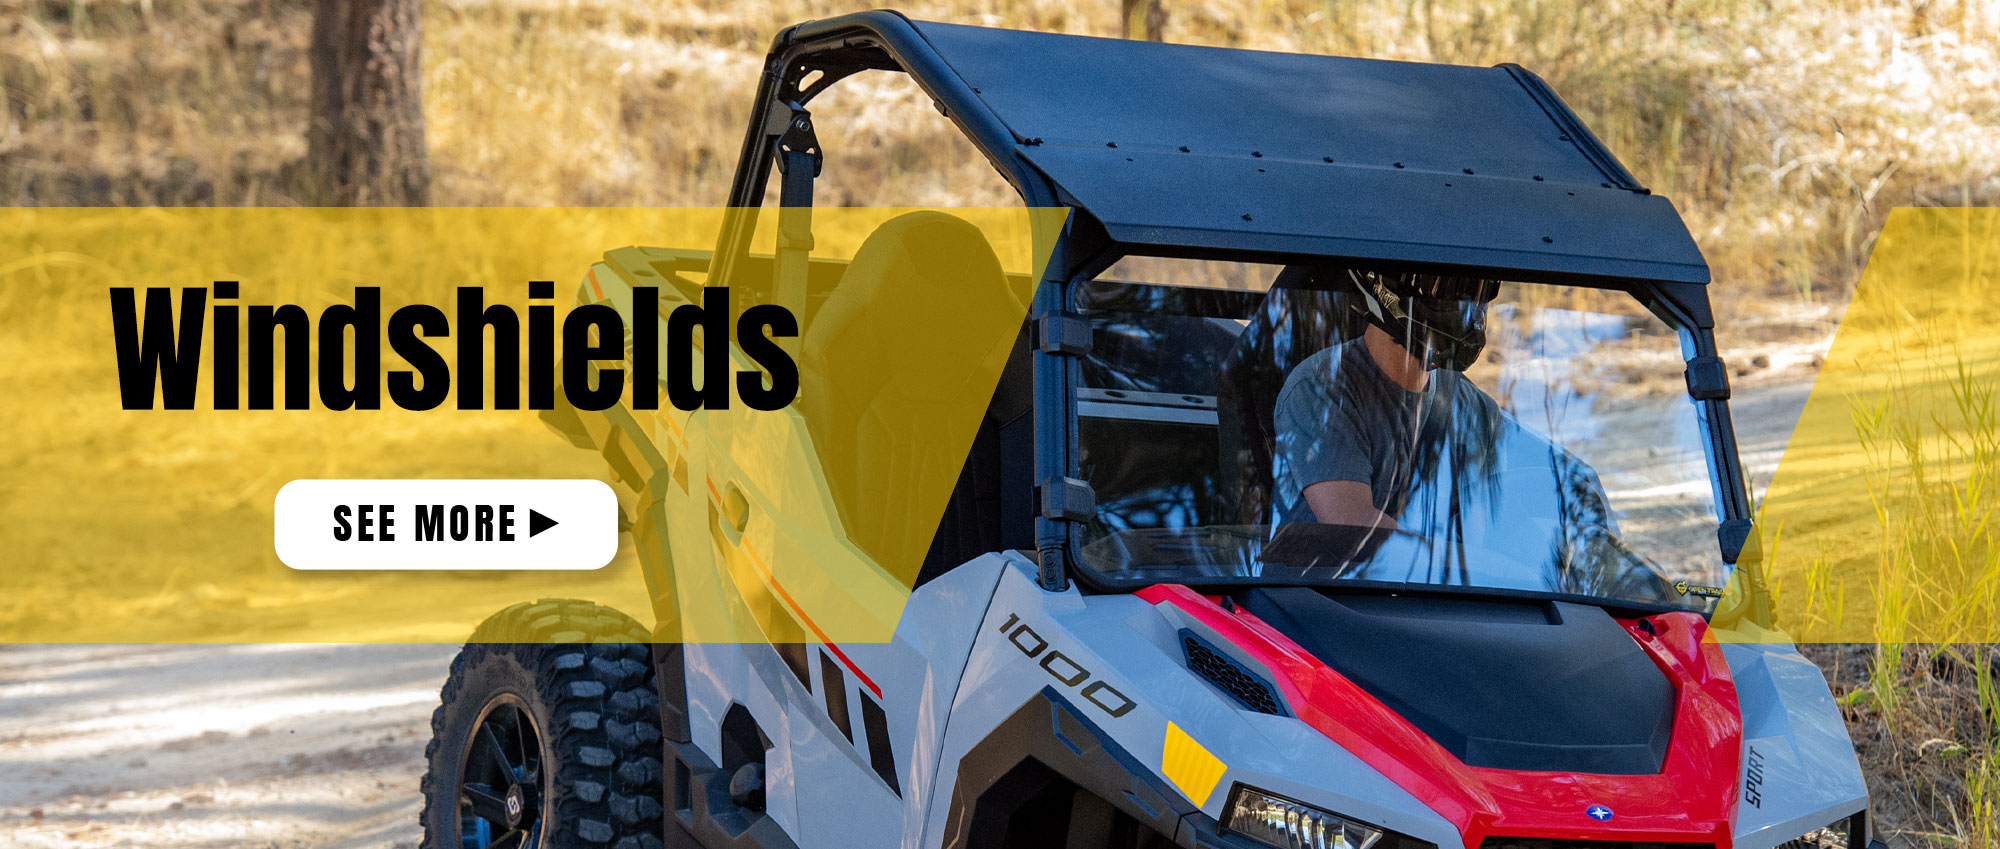 Open Trail Parts Official Power Sports Website - Open Trail